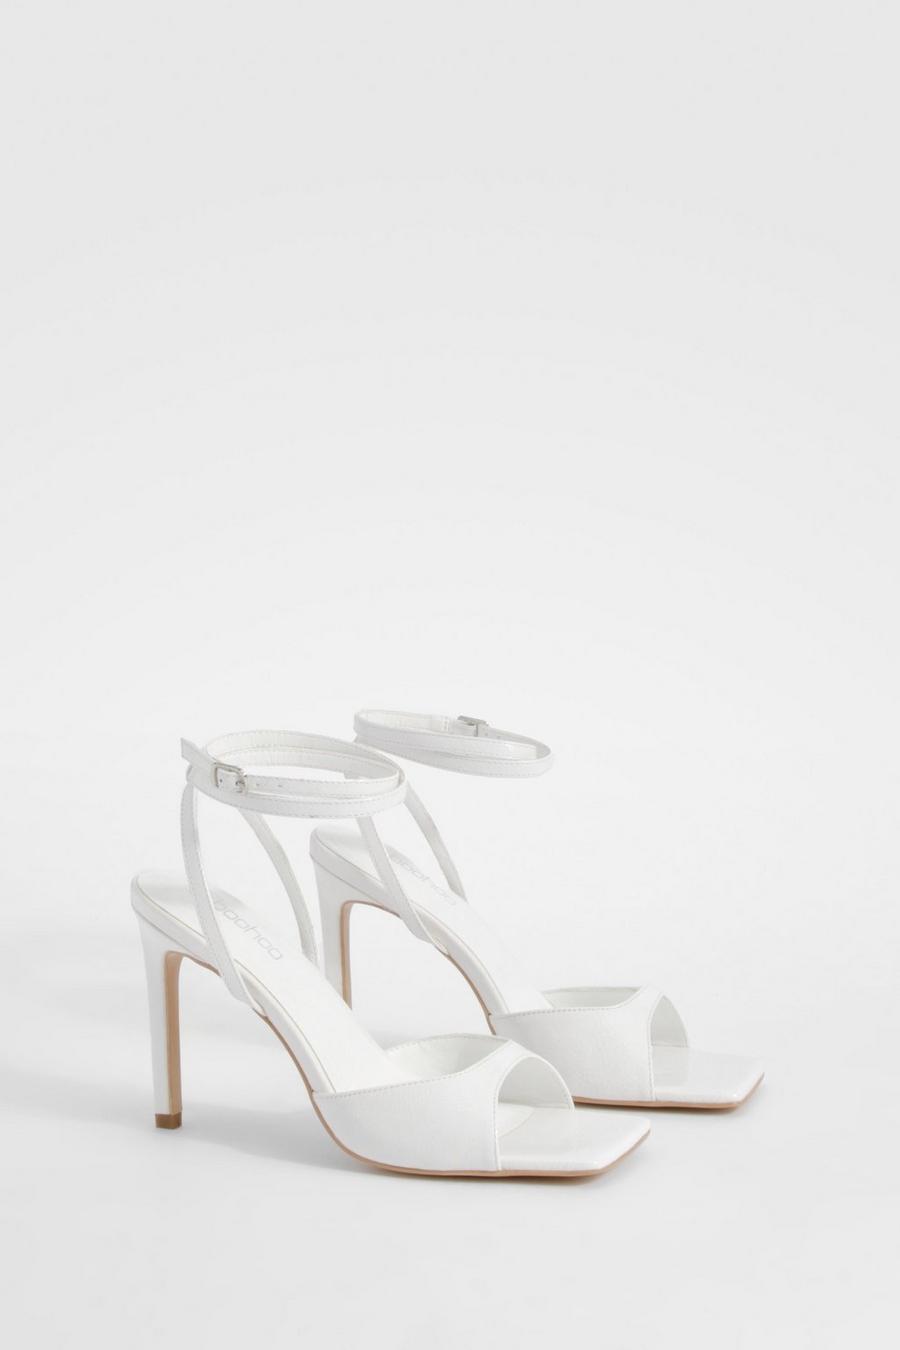 White Patent Square Toe Ankle Wrap Heels